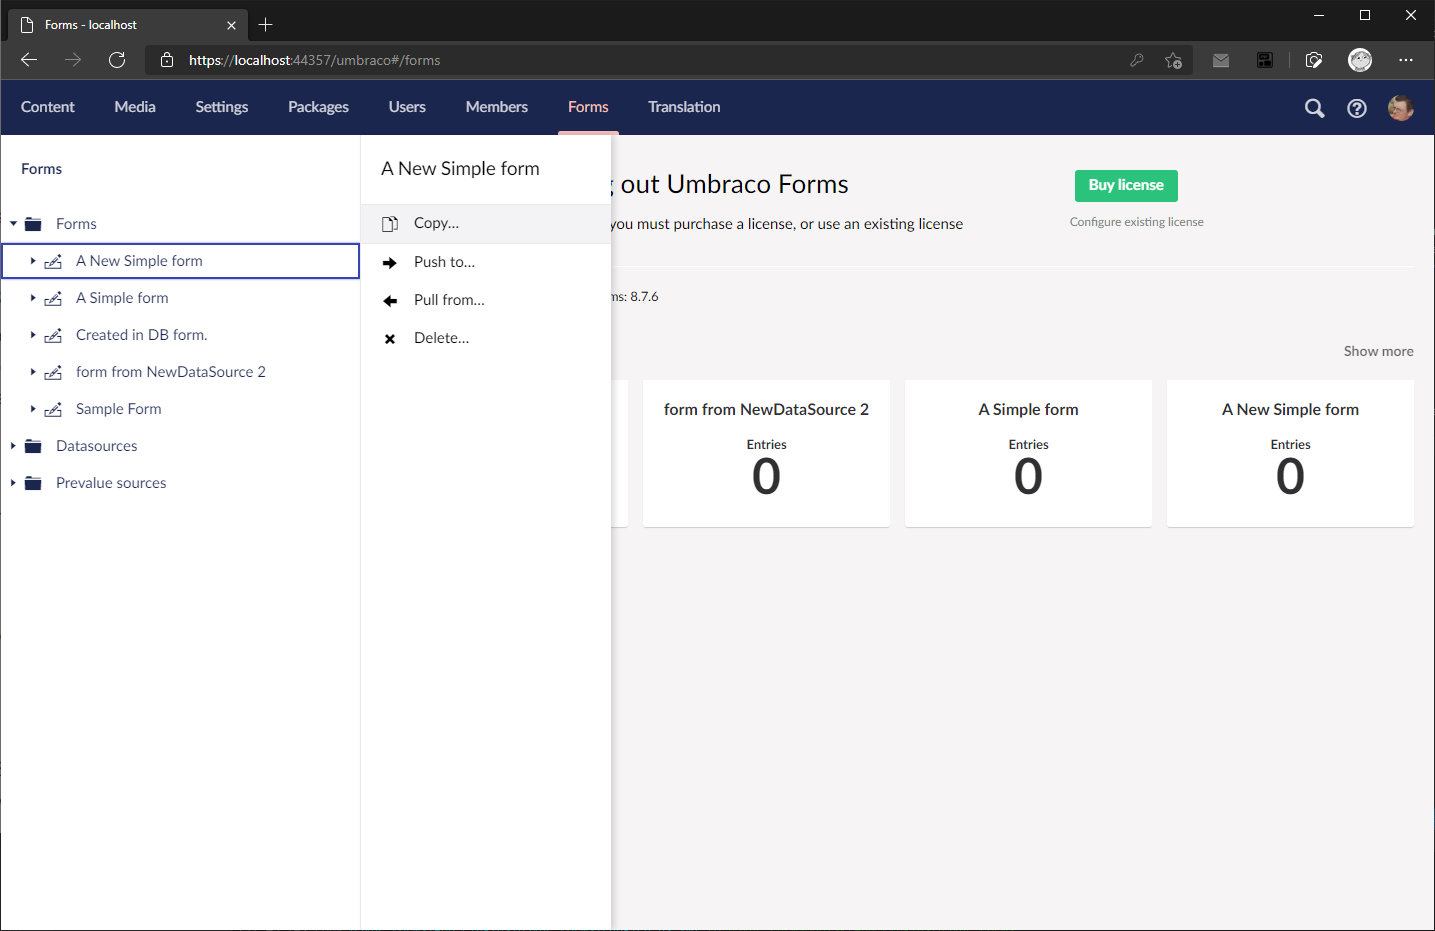 Coming soon! Push and pull Umbraco forms